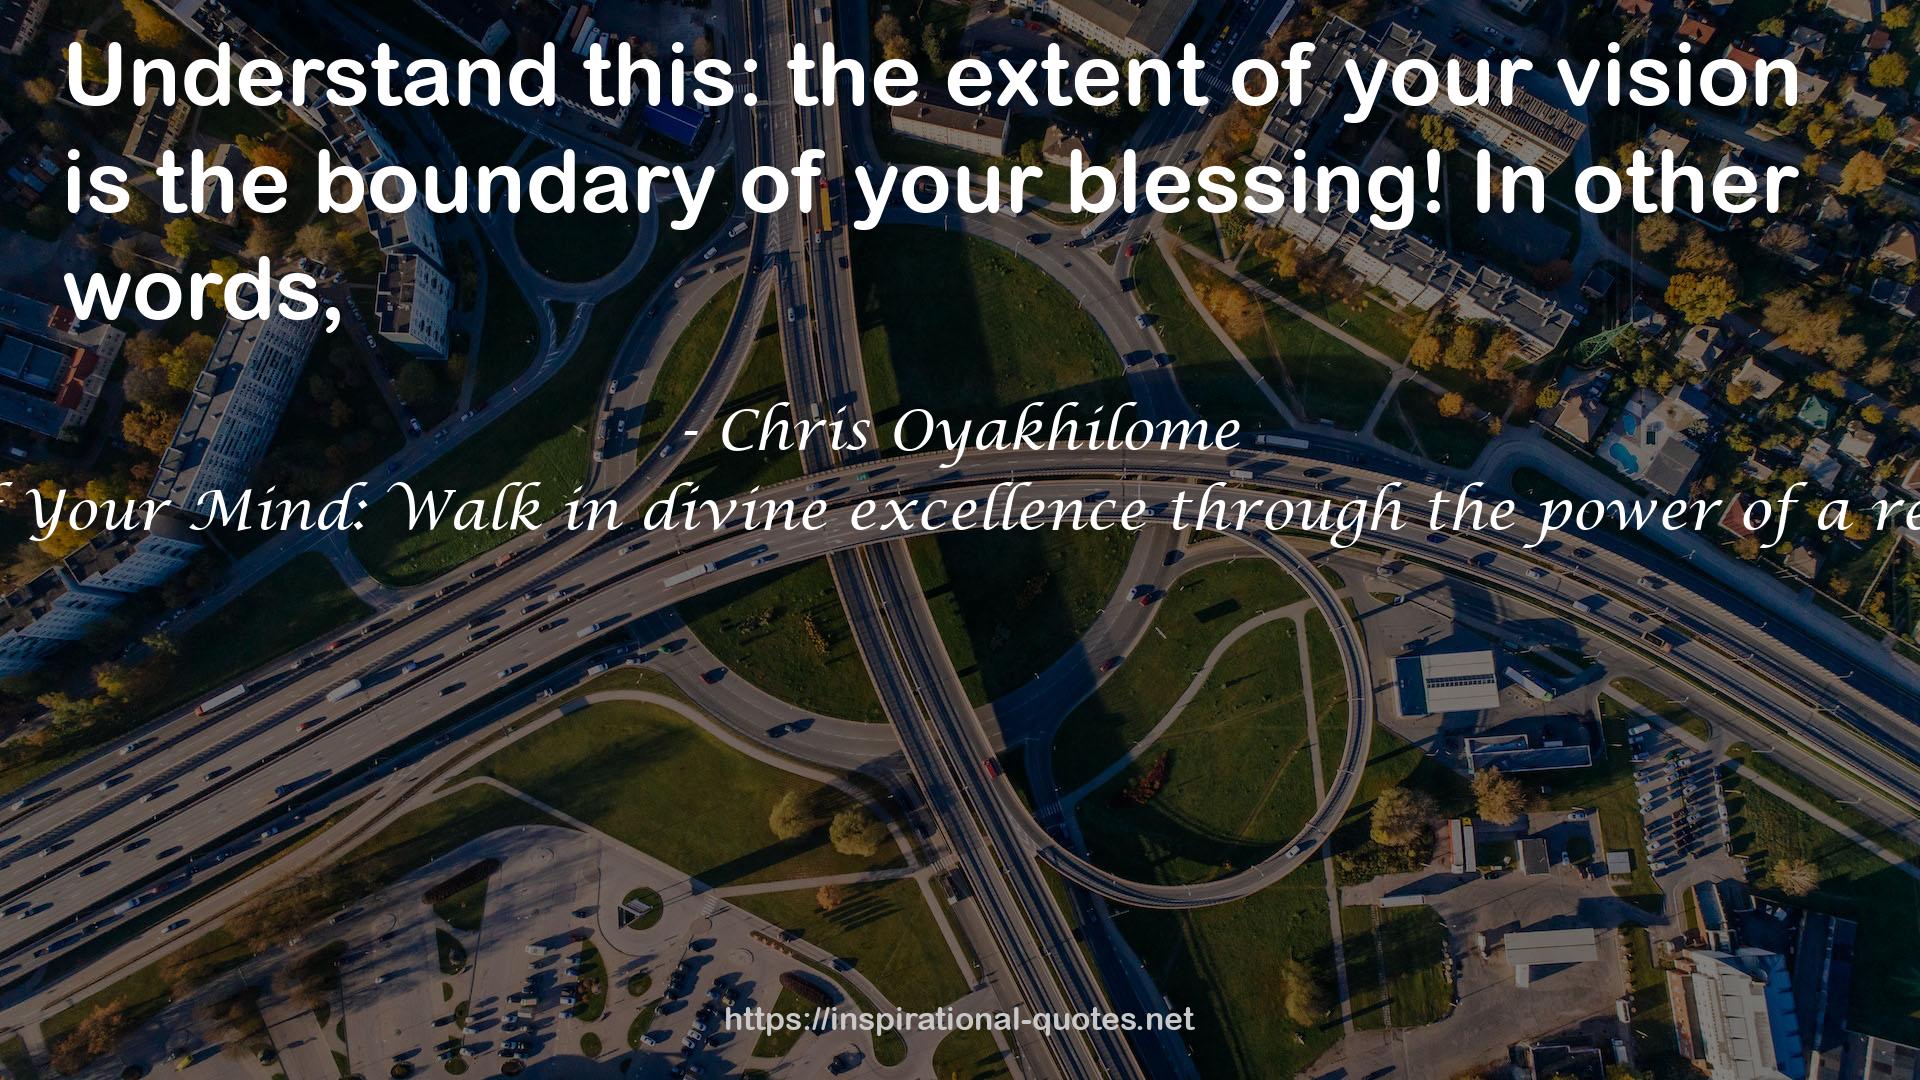 The Power of Your Mind: Walk in divine excellence through the power of a renewed mind QUOTES